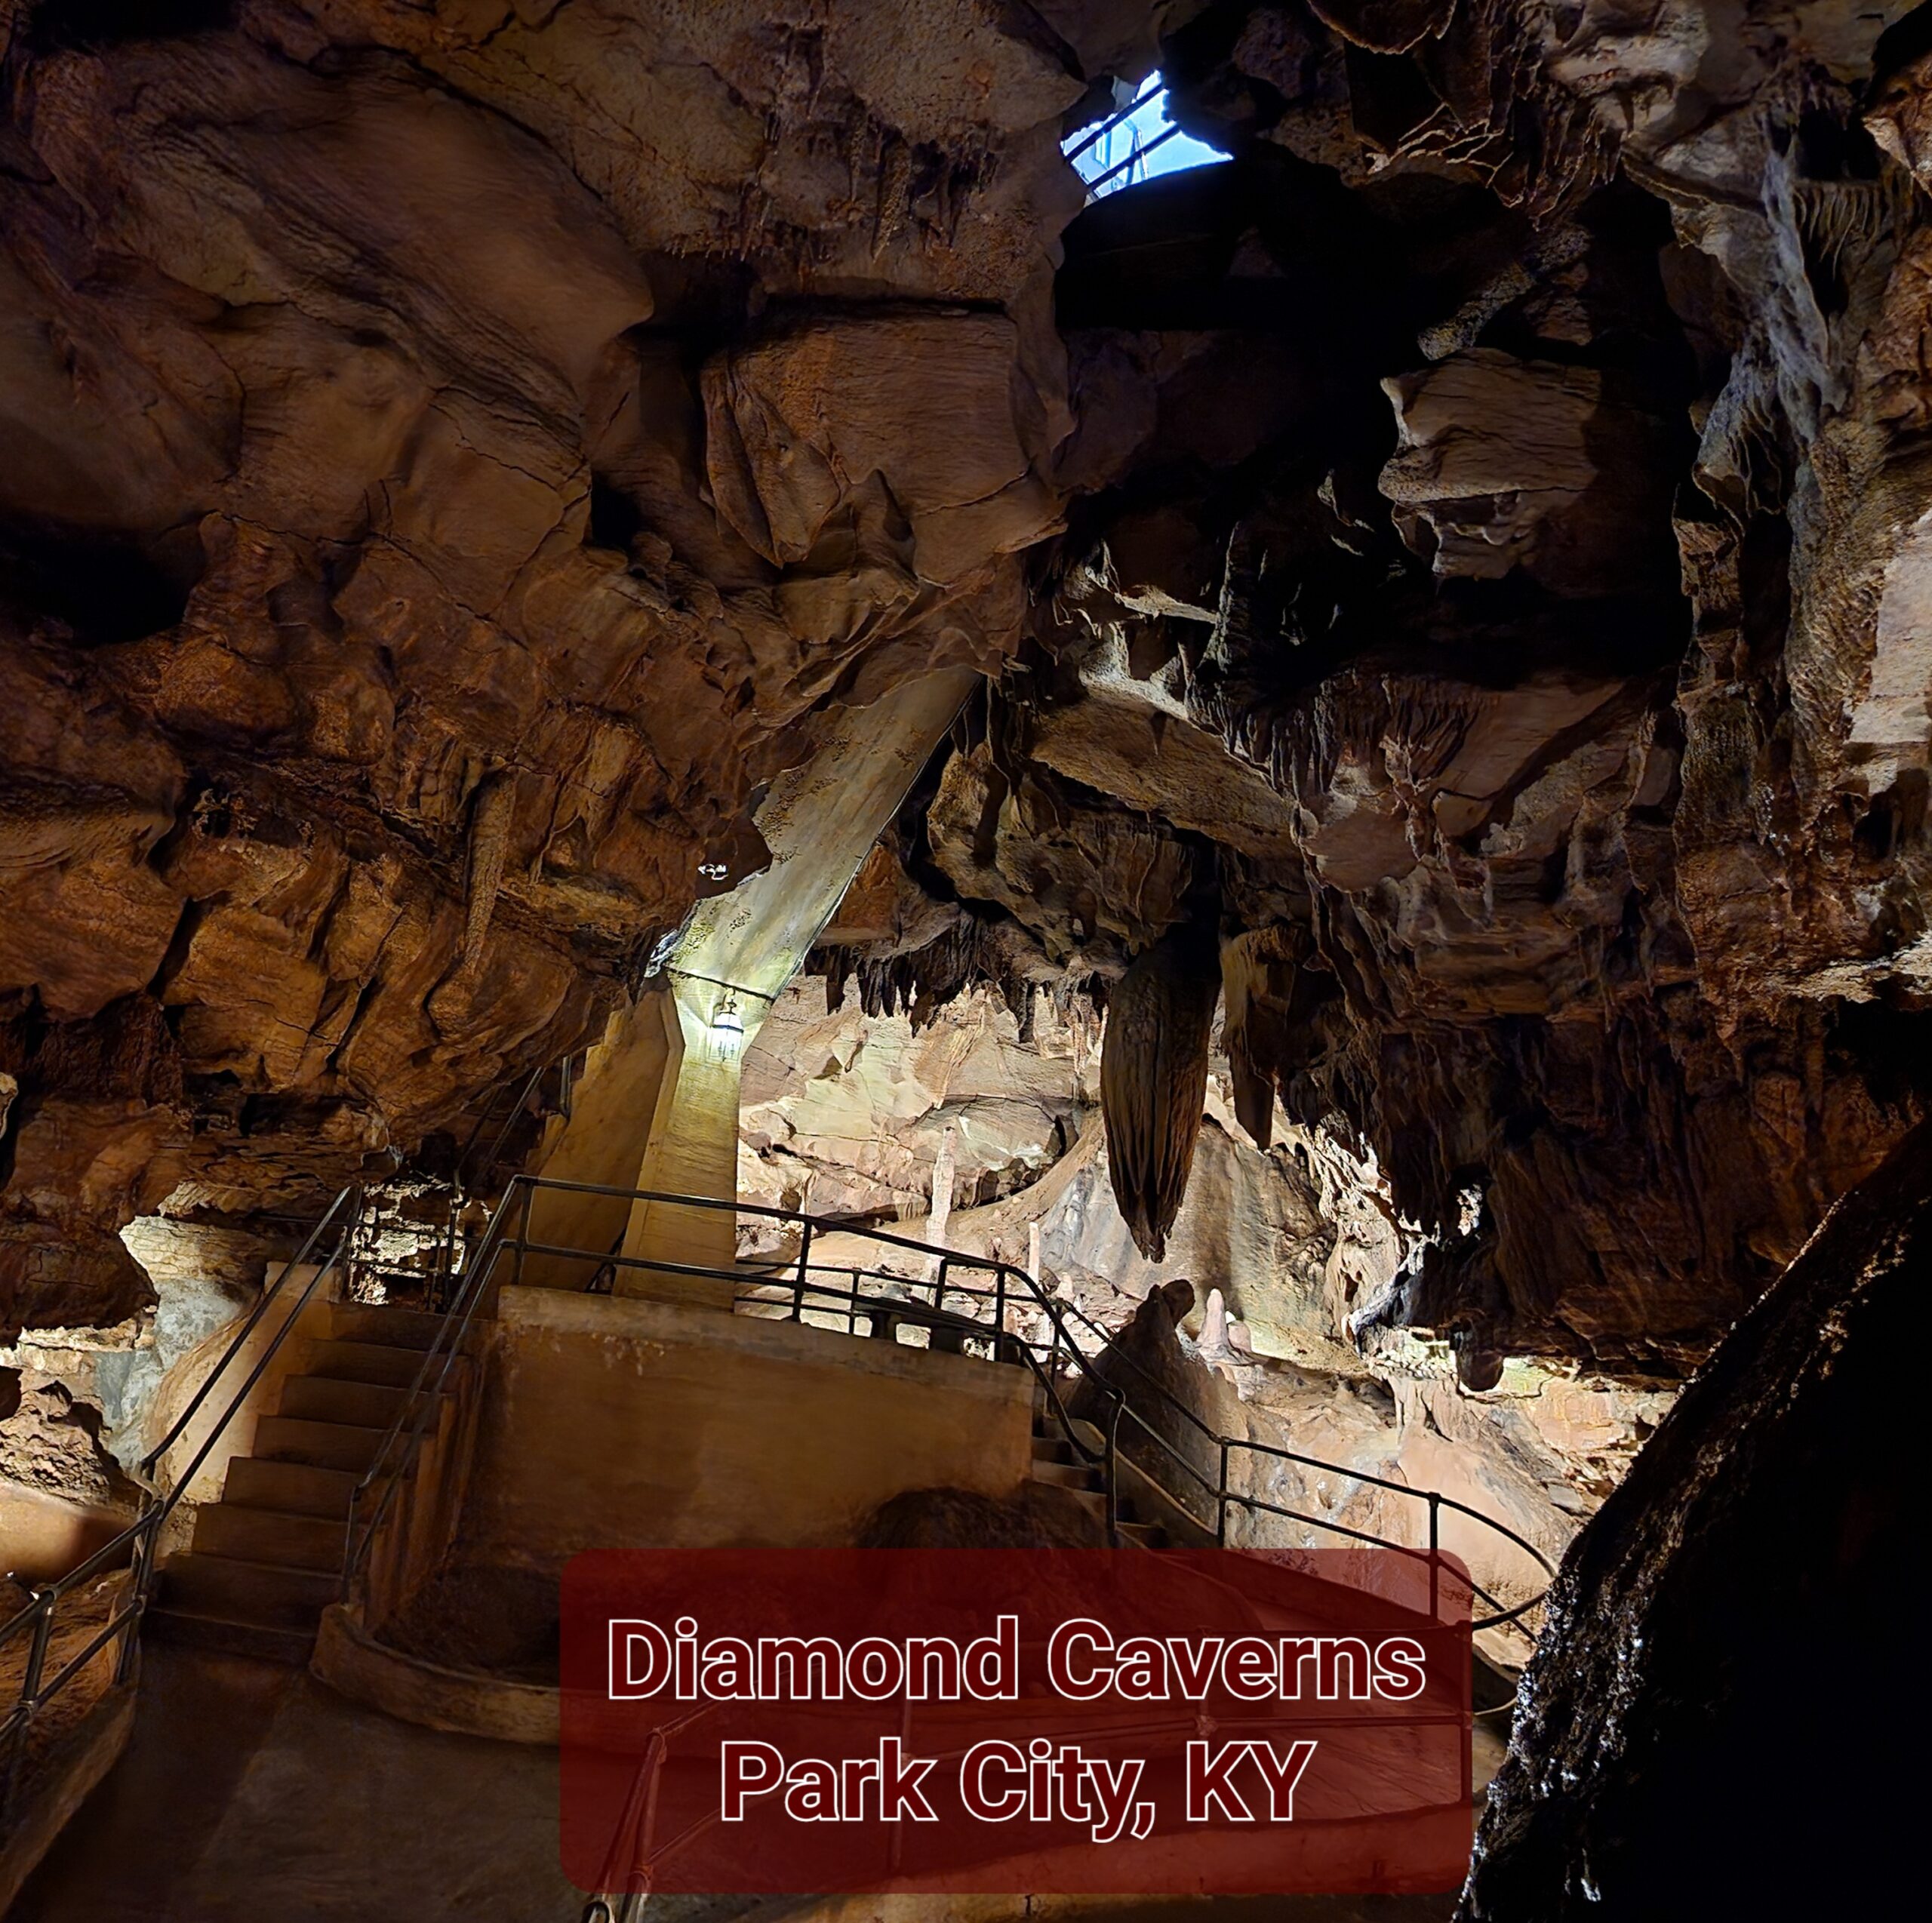 Showcasing the entrance the first cave explorer in Diamond Caverns entered from.